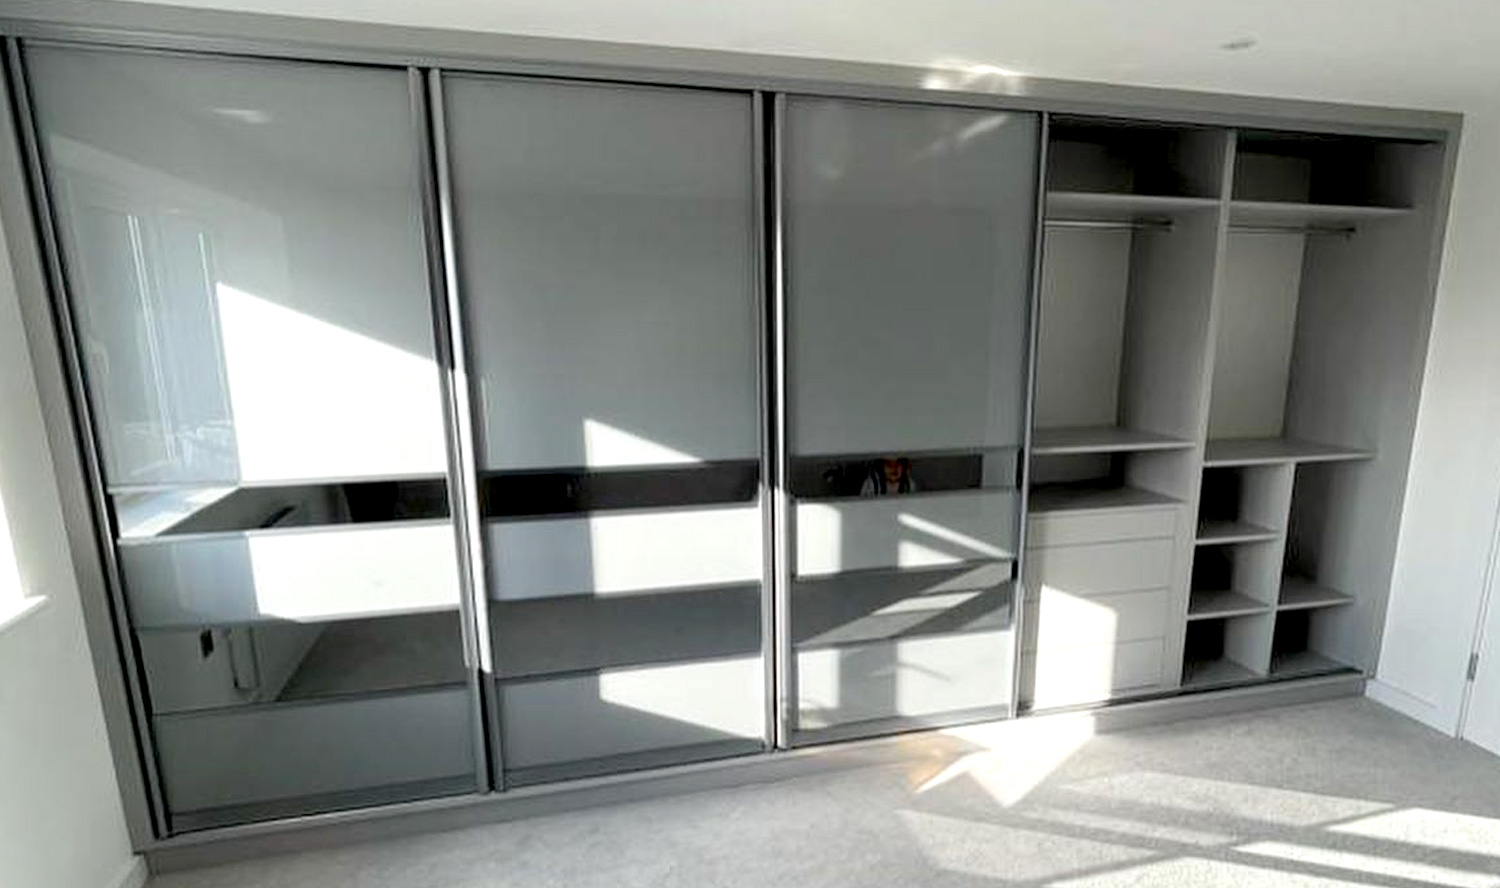 Artuz Wardrobe Mechanism provides Acrylic Sliding Wardrobe with lock and running sliding door systems that let you create sliding doors in a new dimensions